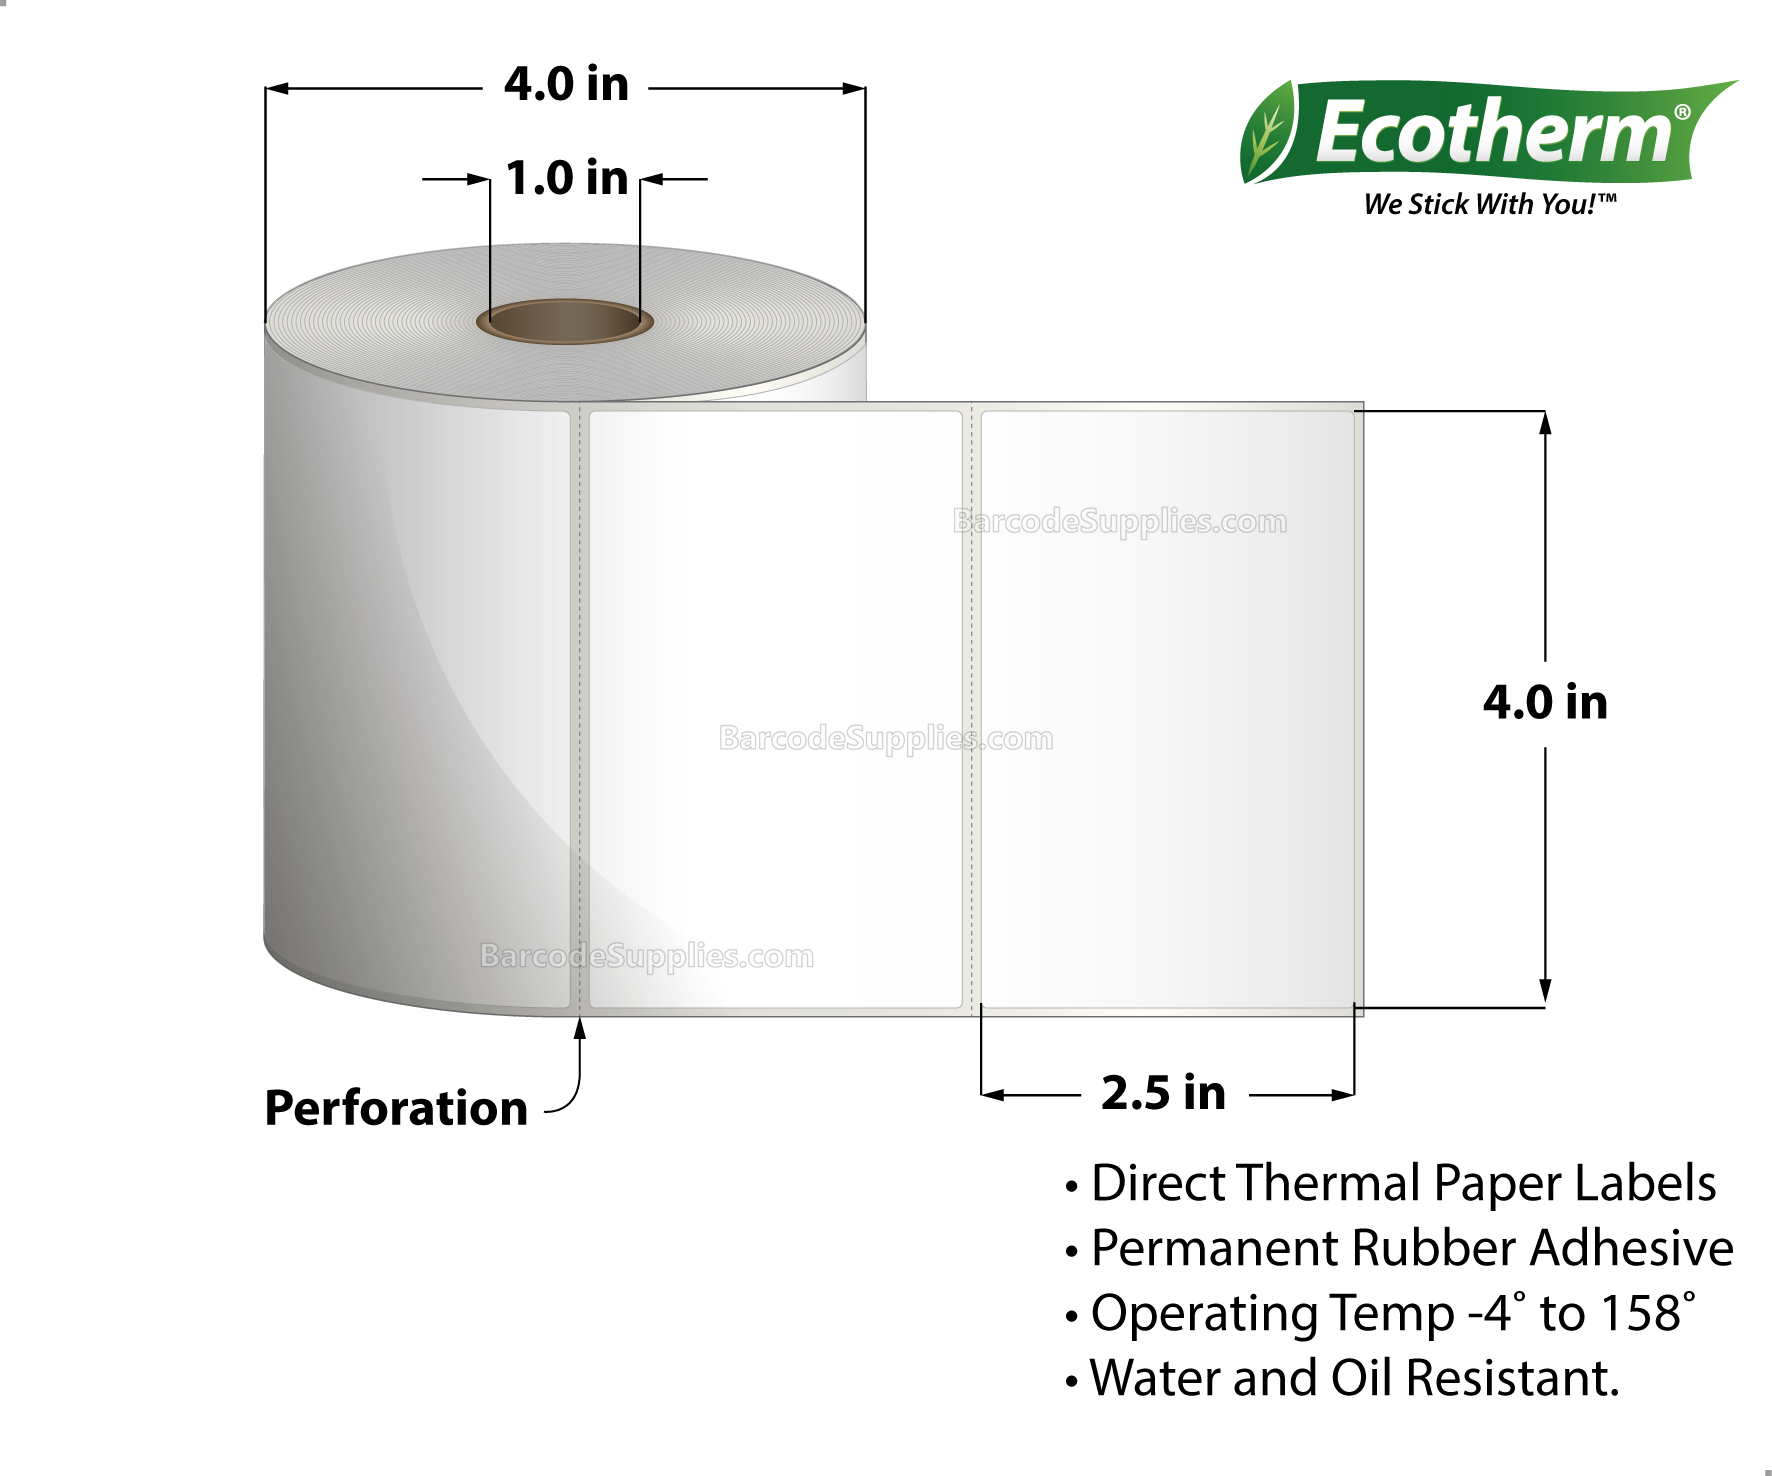 Products 4 x 2.5 Direct Thermal White Labels With Rubber Adhesive - Perforated - 600 Labels Per Roll - Carton Of 4 Rolls - 2400 Labels Total - MPN: ECOTHERM14113-4